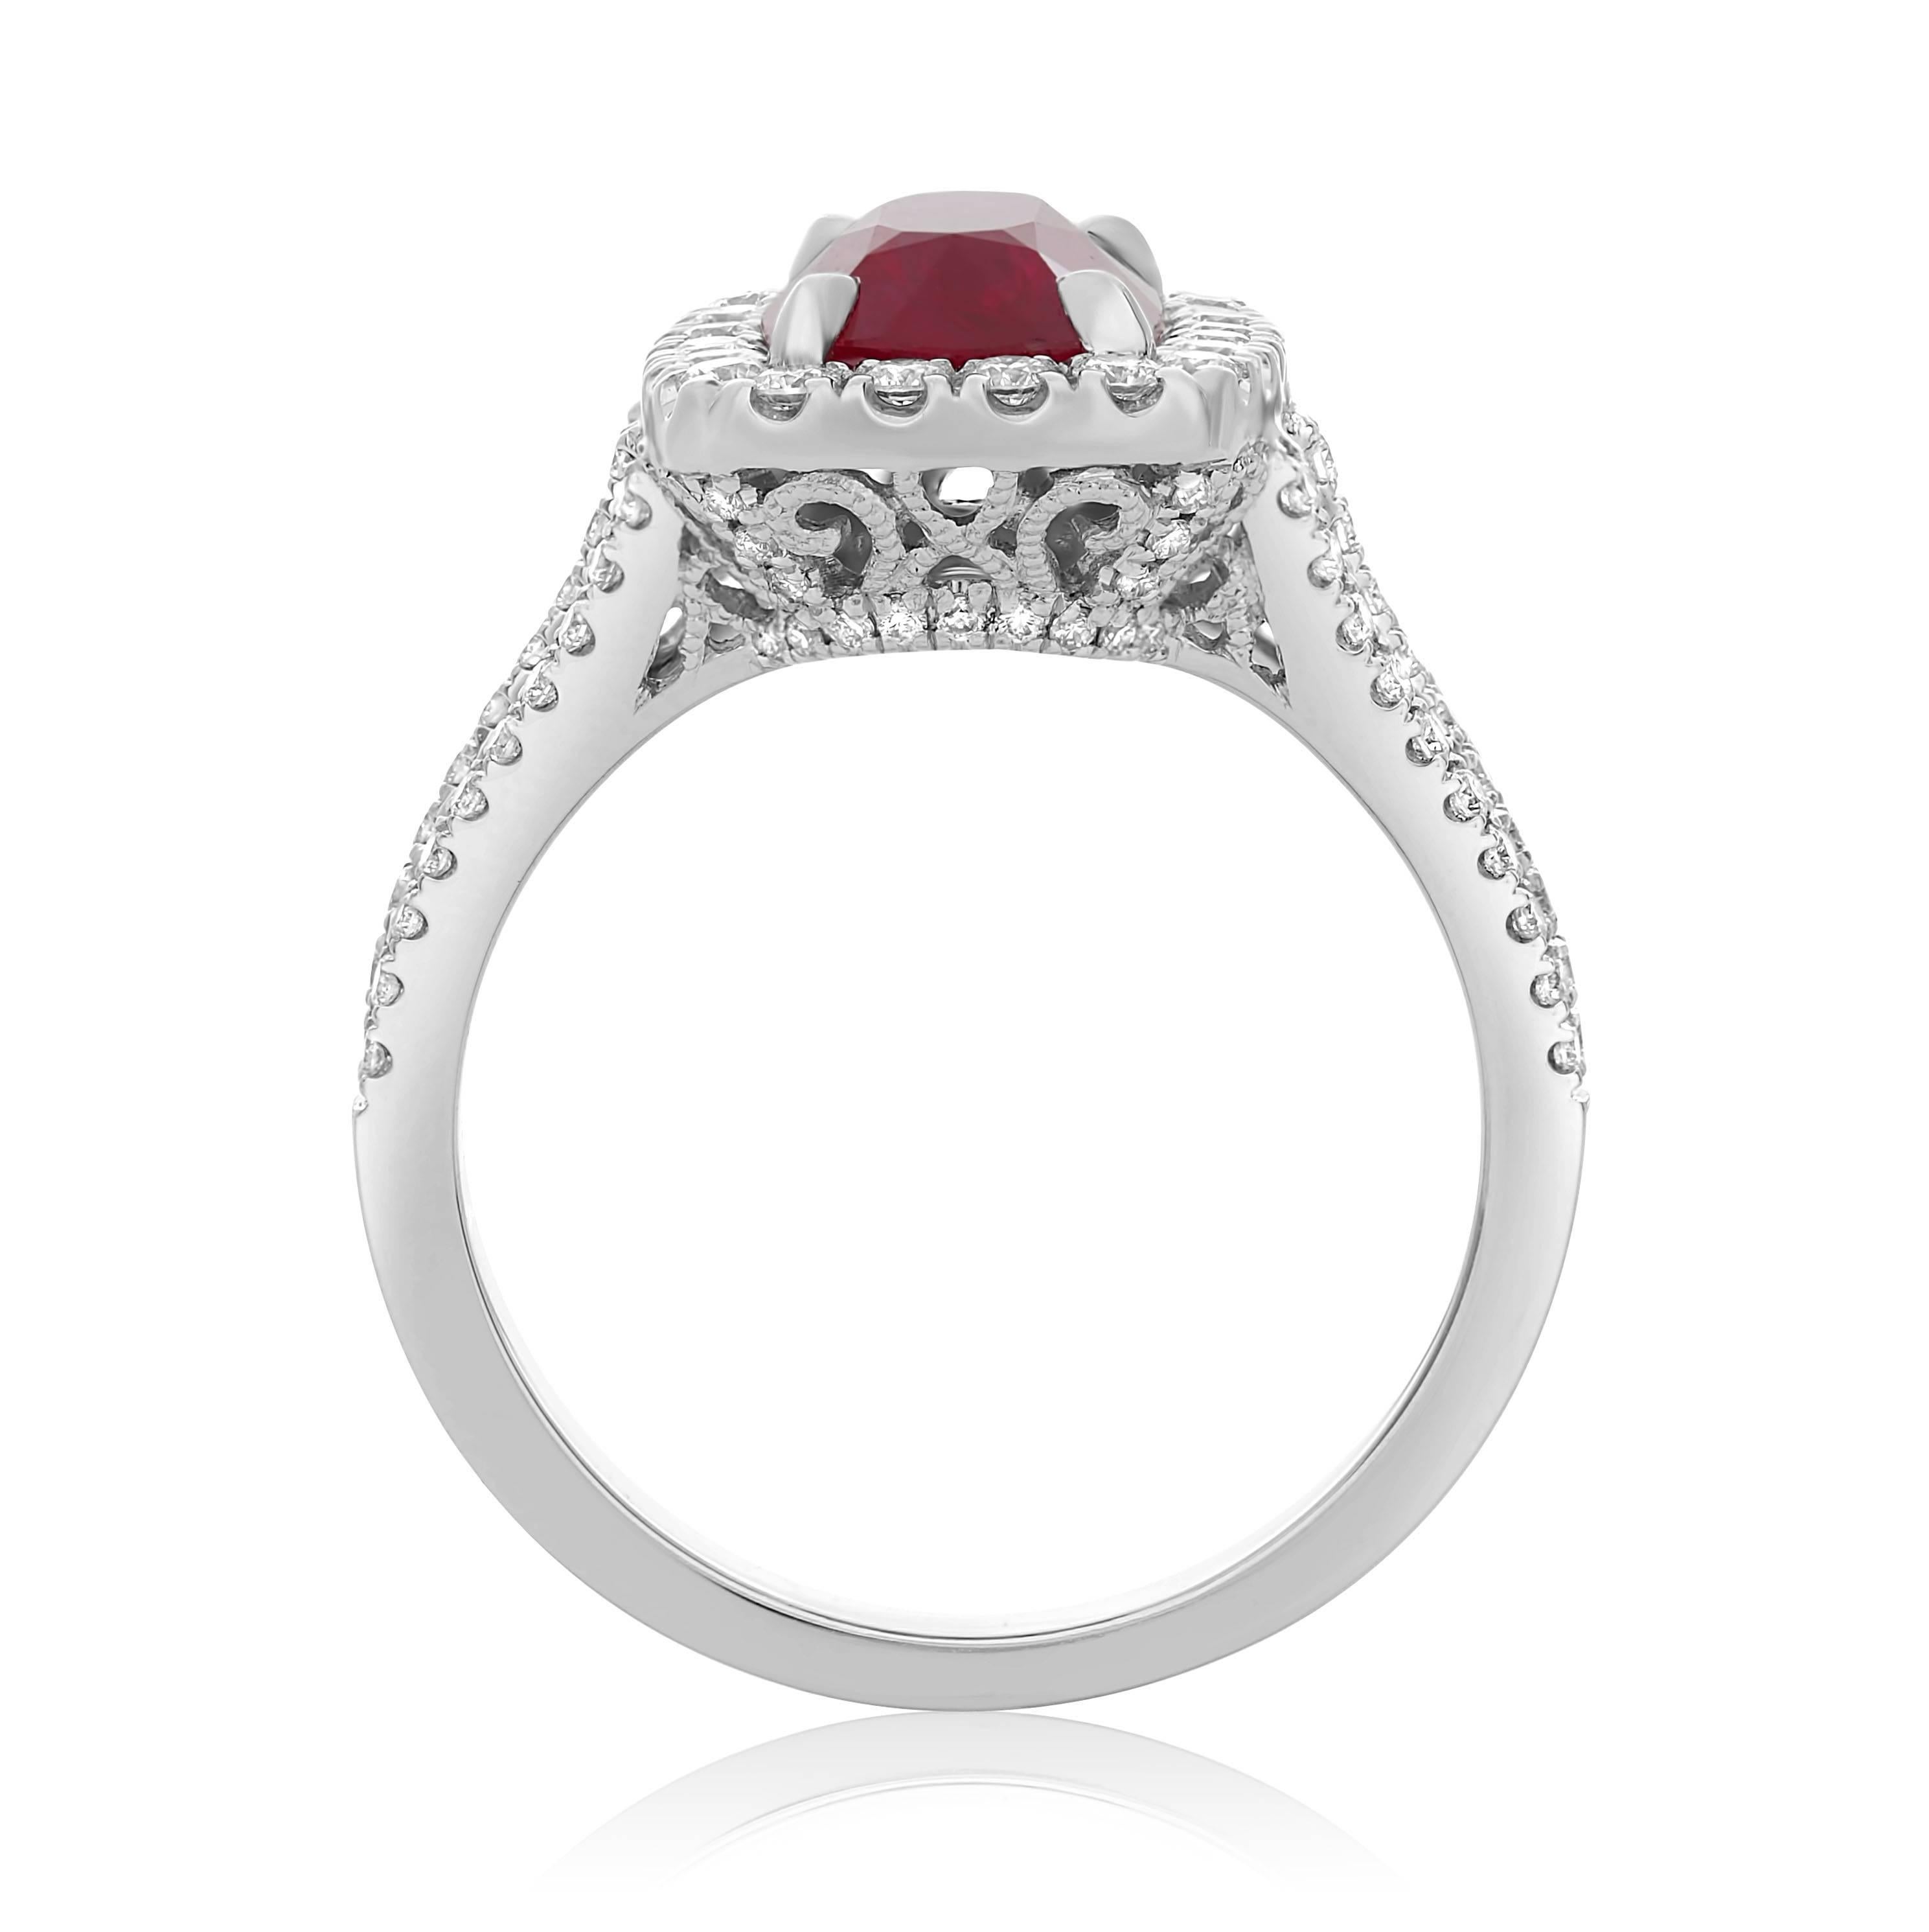 GIA certified 3.09 carat Cushion Cut Ruby ring with pave diamond halo. Split shank design with pave diamonds running one quarter way down the shank. Ruby is the July birthstone making this a perfect gift for any occasion for the July babies in your